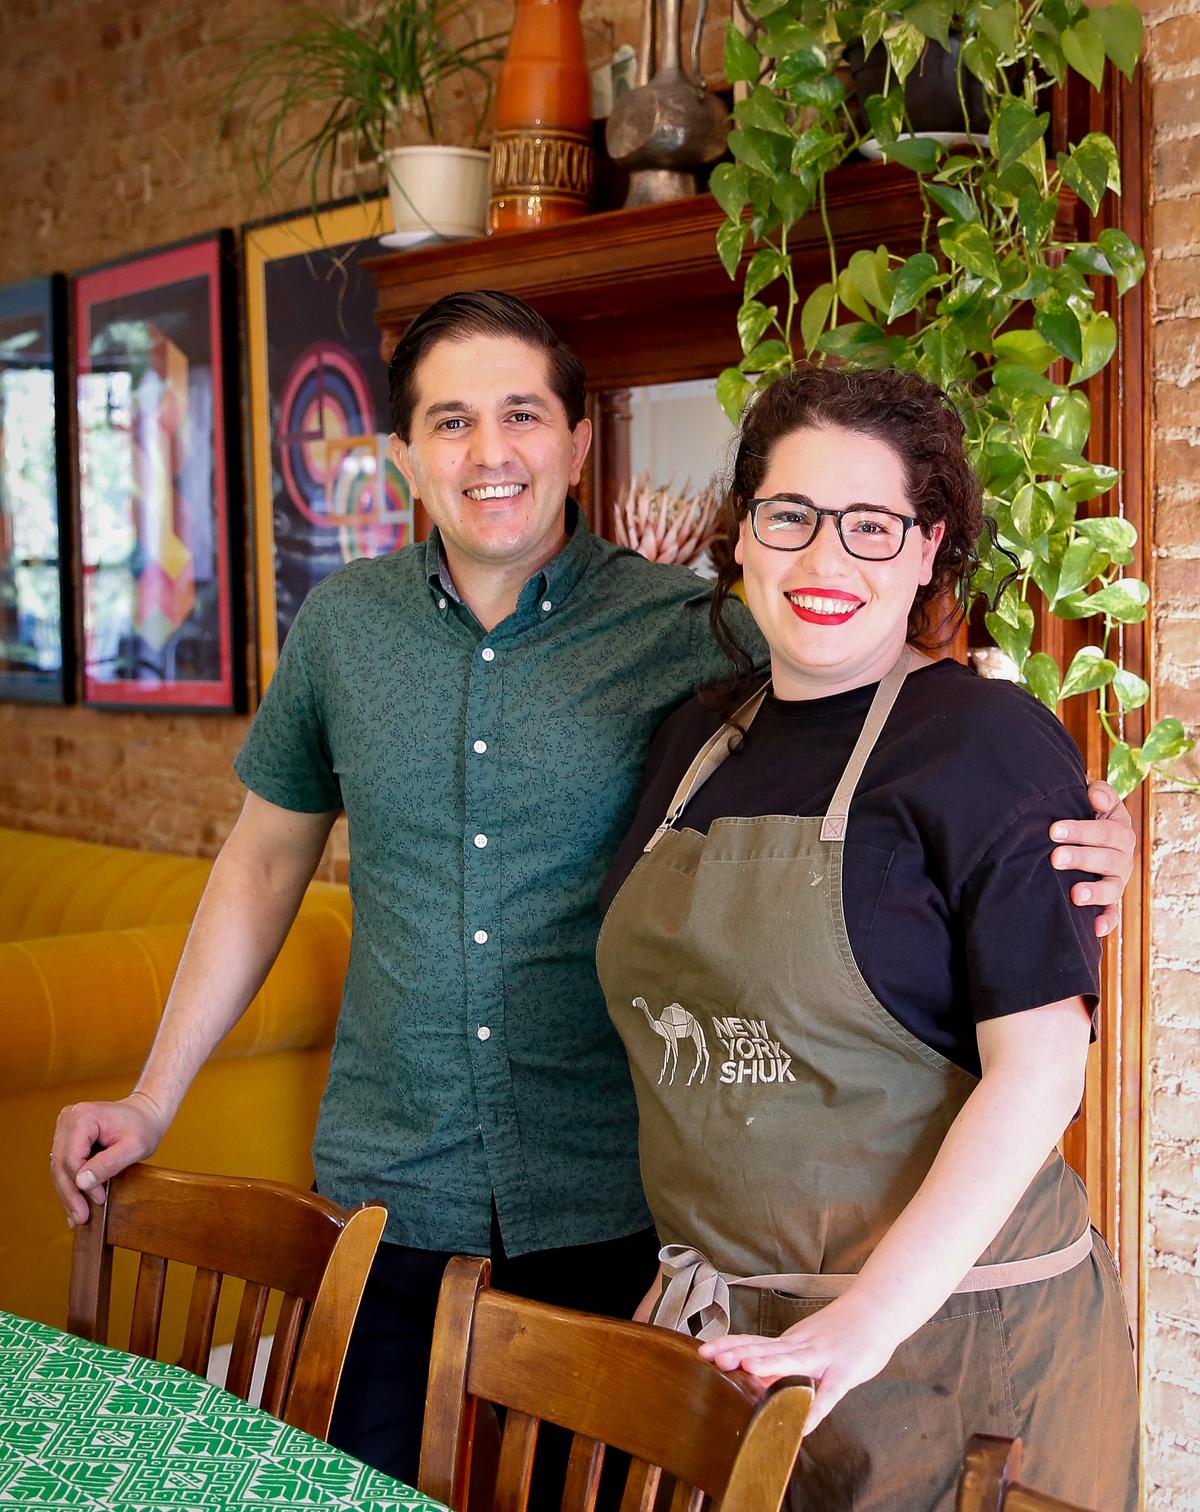 Ron and Leetal Arazi, chefs and founders of New York Shuk. (Samira Bouaou/The Epoch Times)